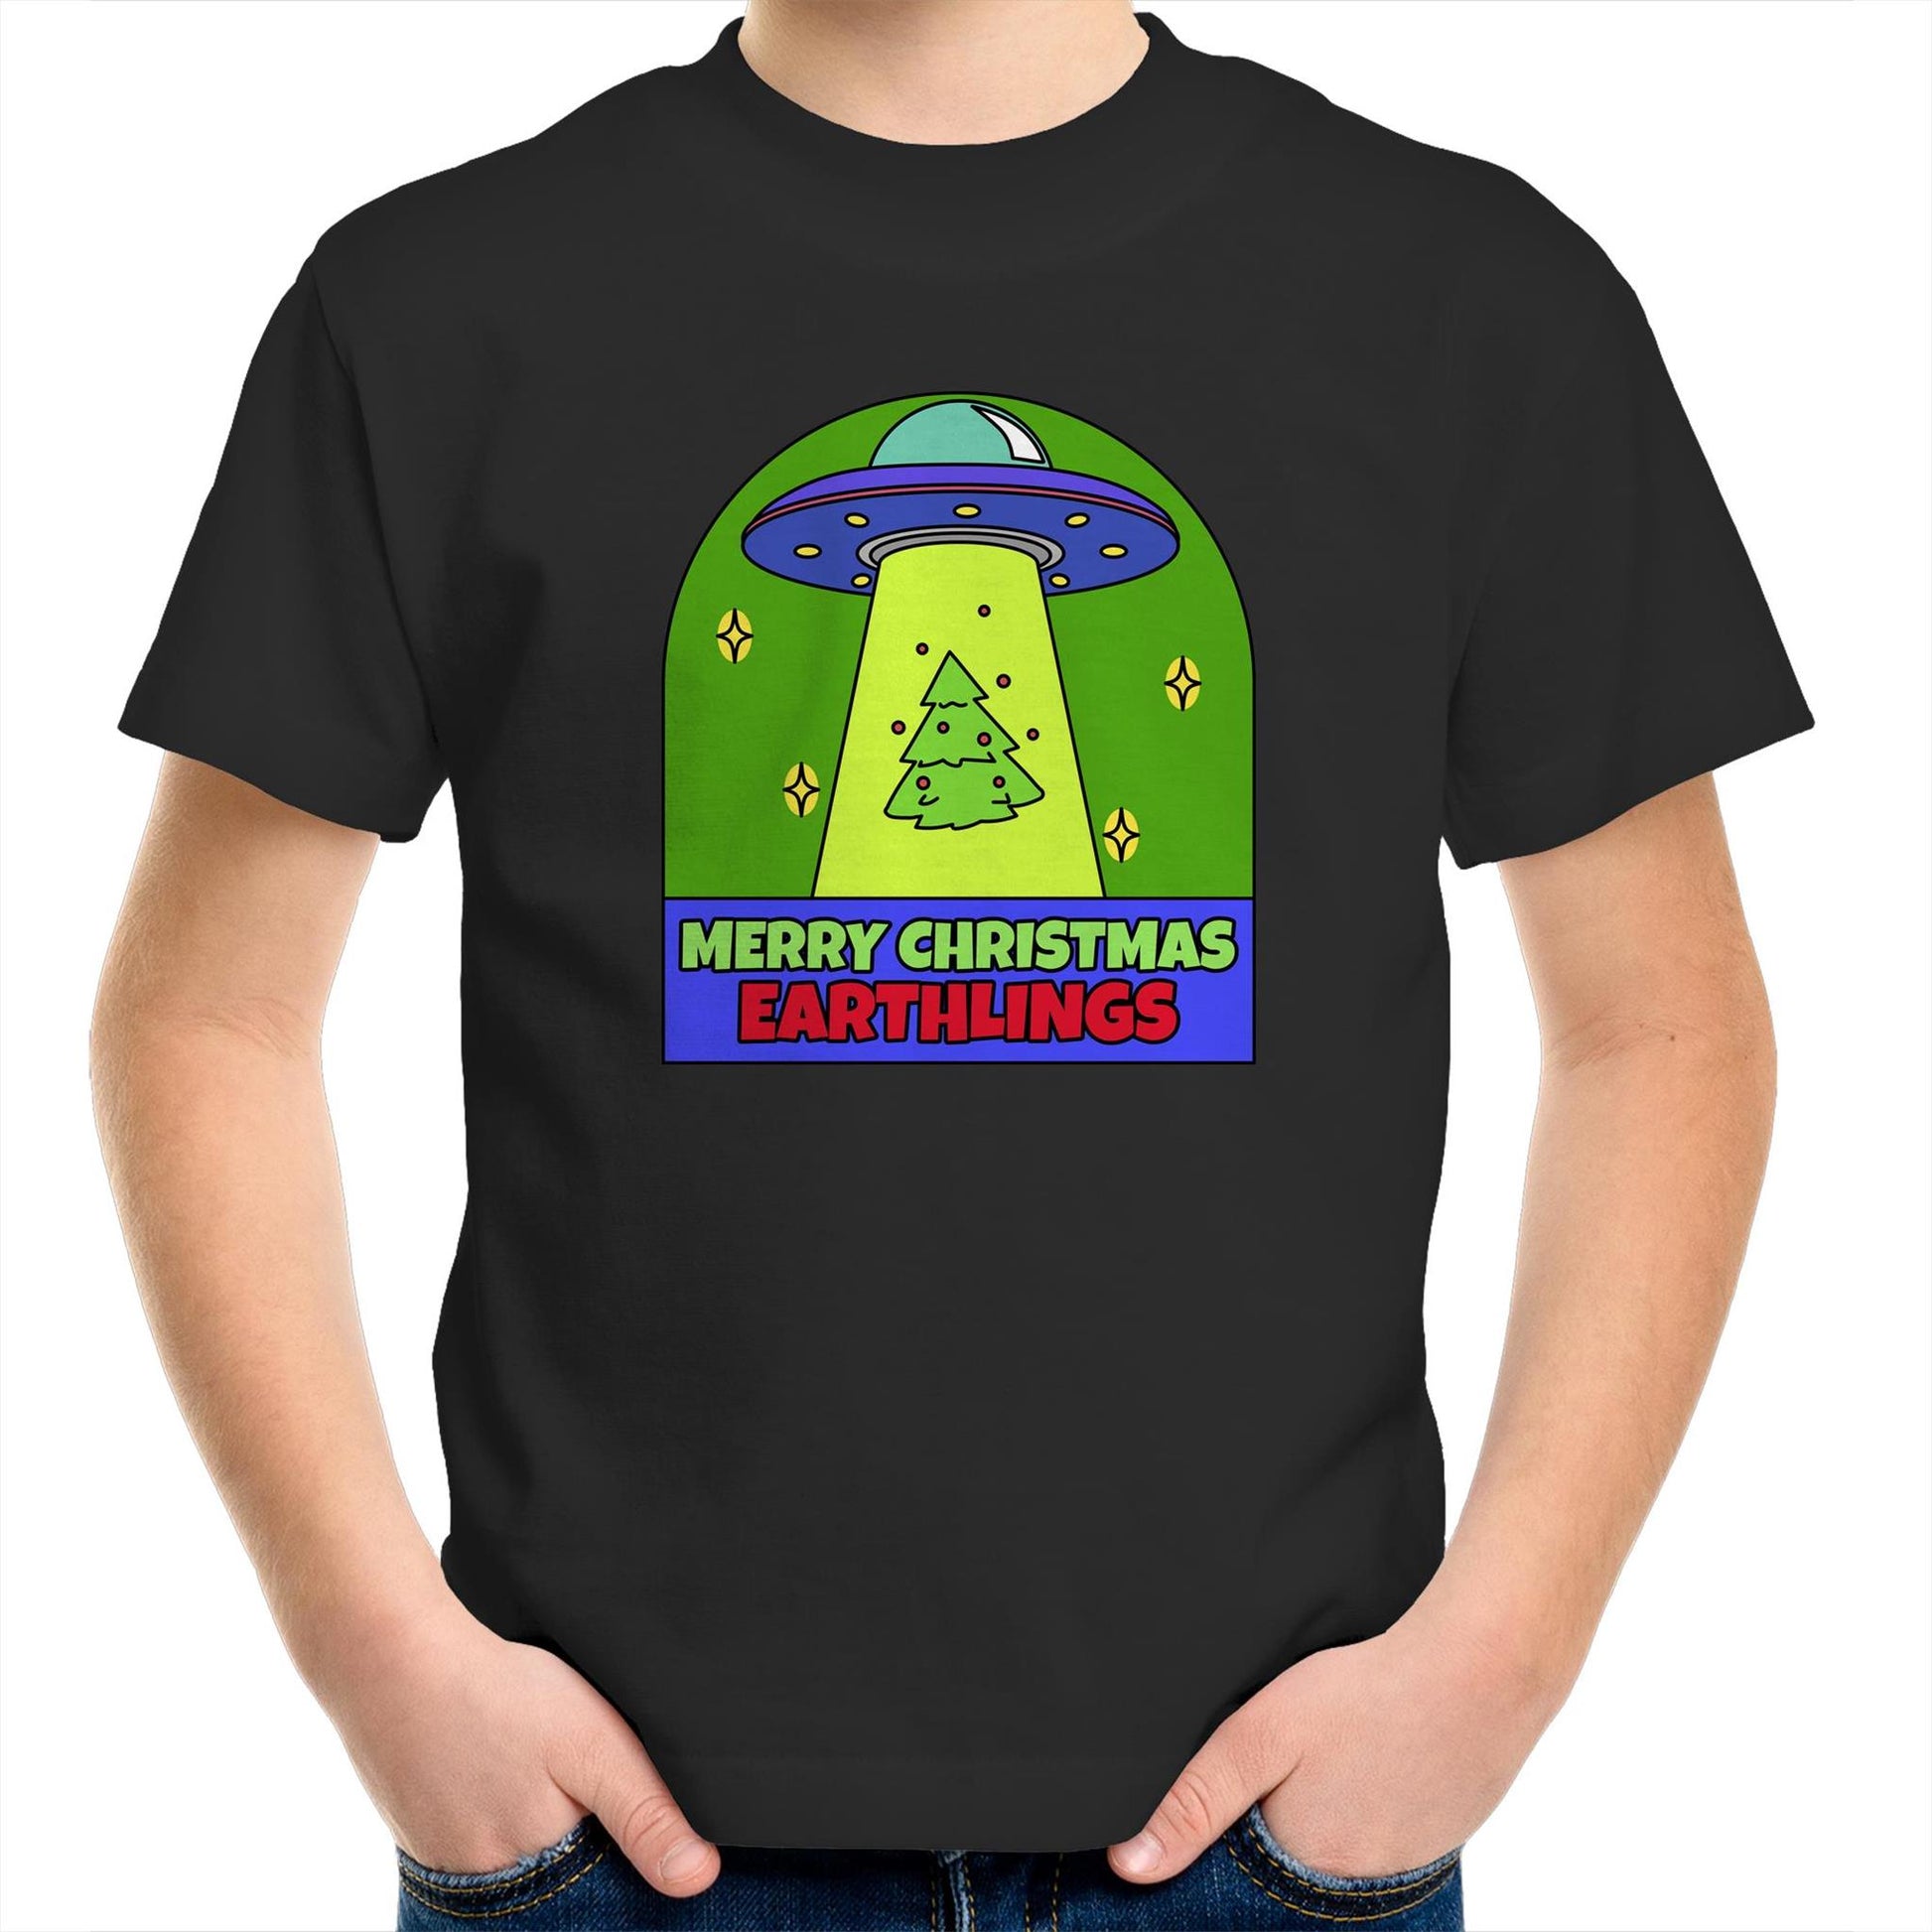 Merry Christmas Earthlings, UFO - Kids Youth T-Shirt Black Christmas Kids T-shirt Merry Christmas